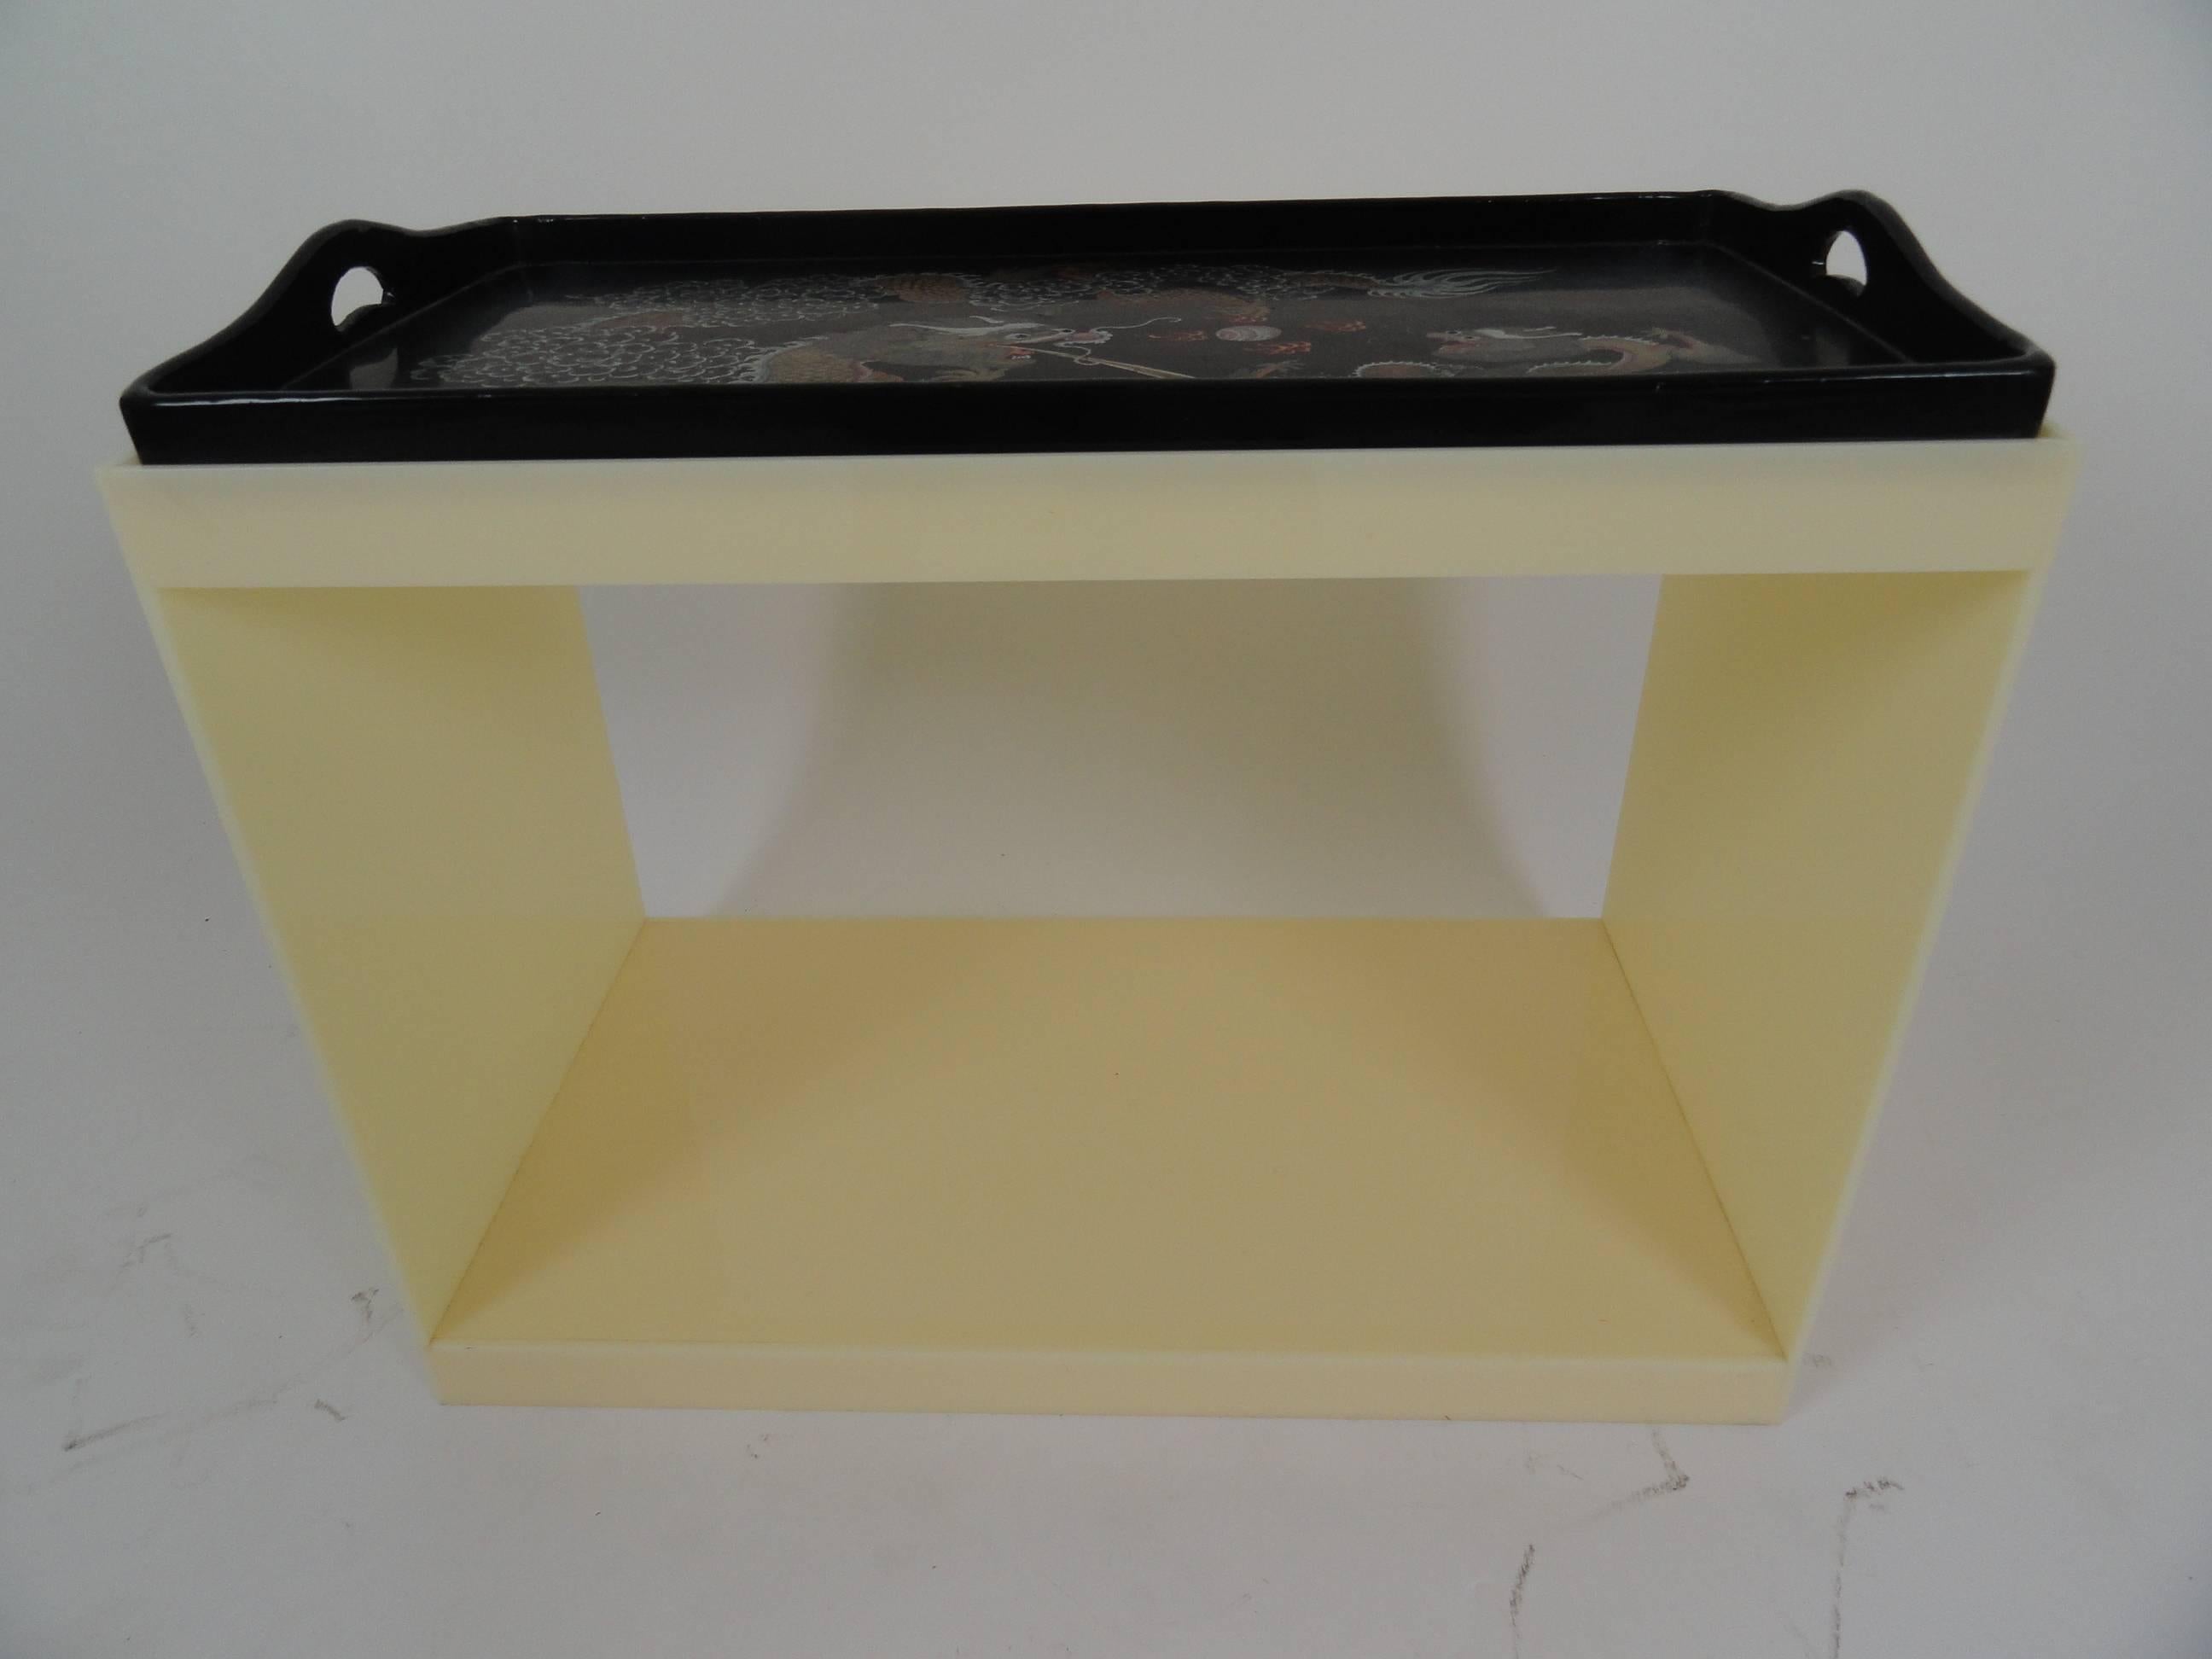 Off-white/ cream colored acrylic new custom table base with antique Chinese black lacquer tray top with handles, showing traditional Chinese dragon motif.